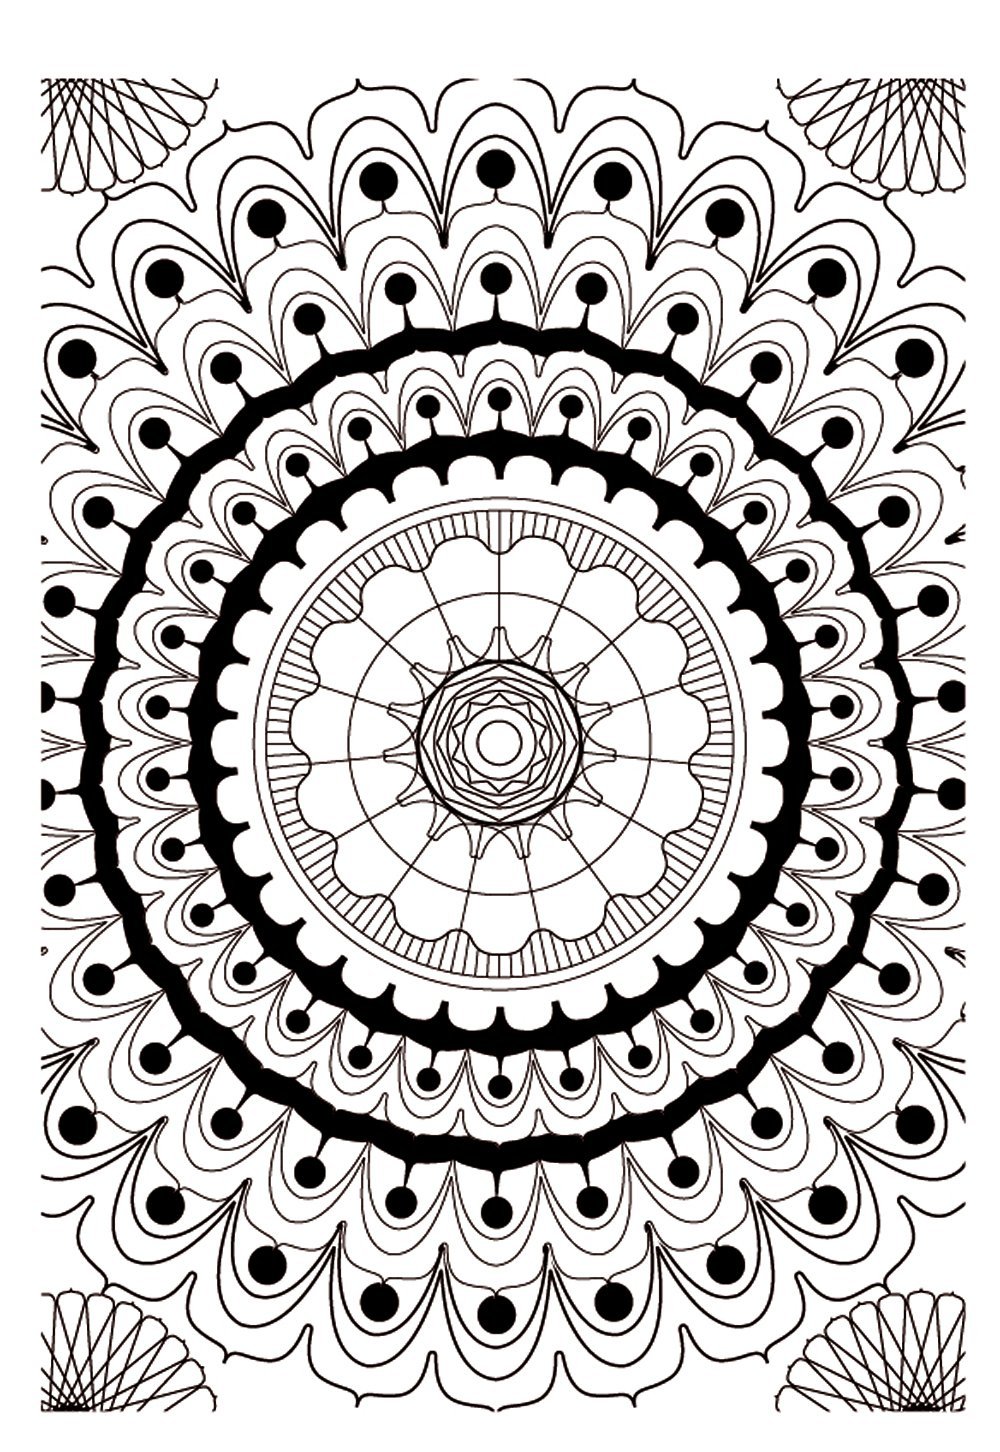 Mandala to color zen relax free - 9 - Image with : Heart